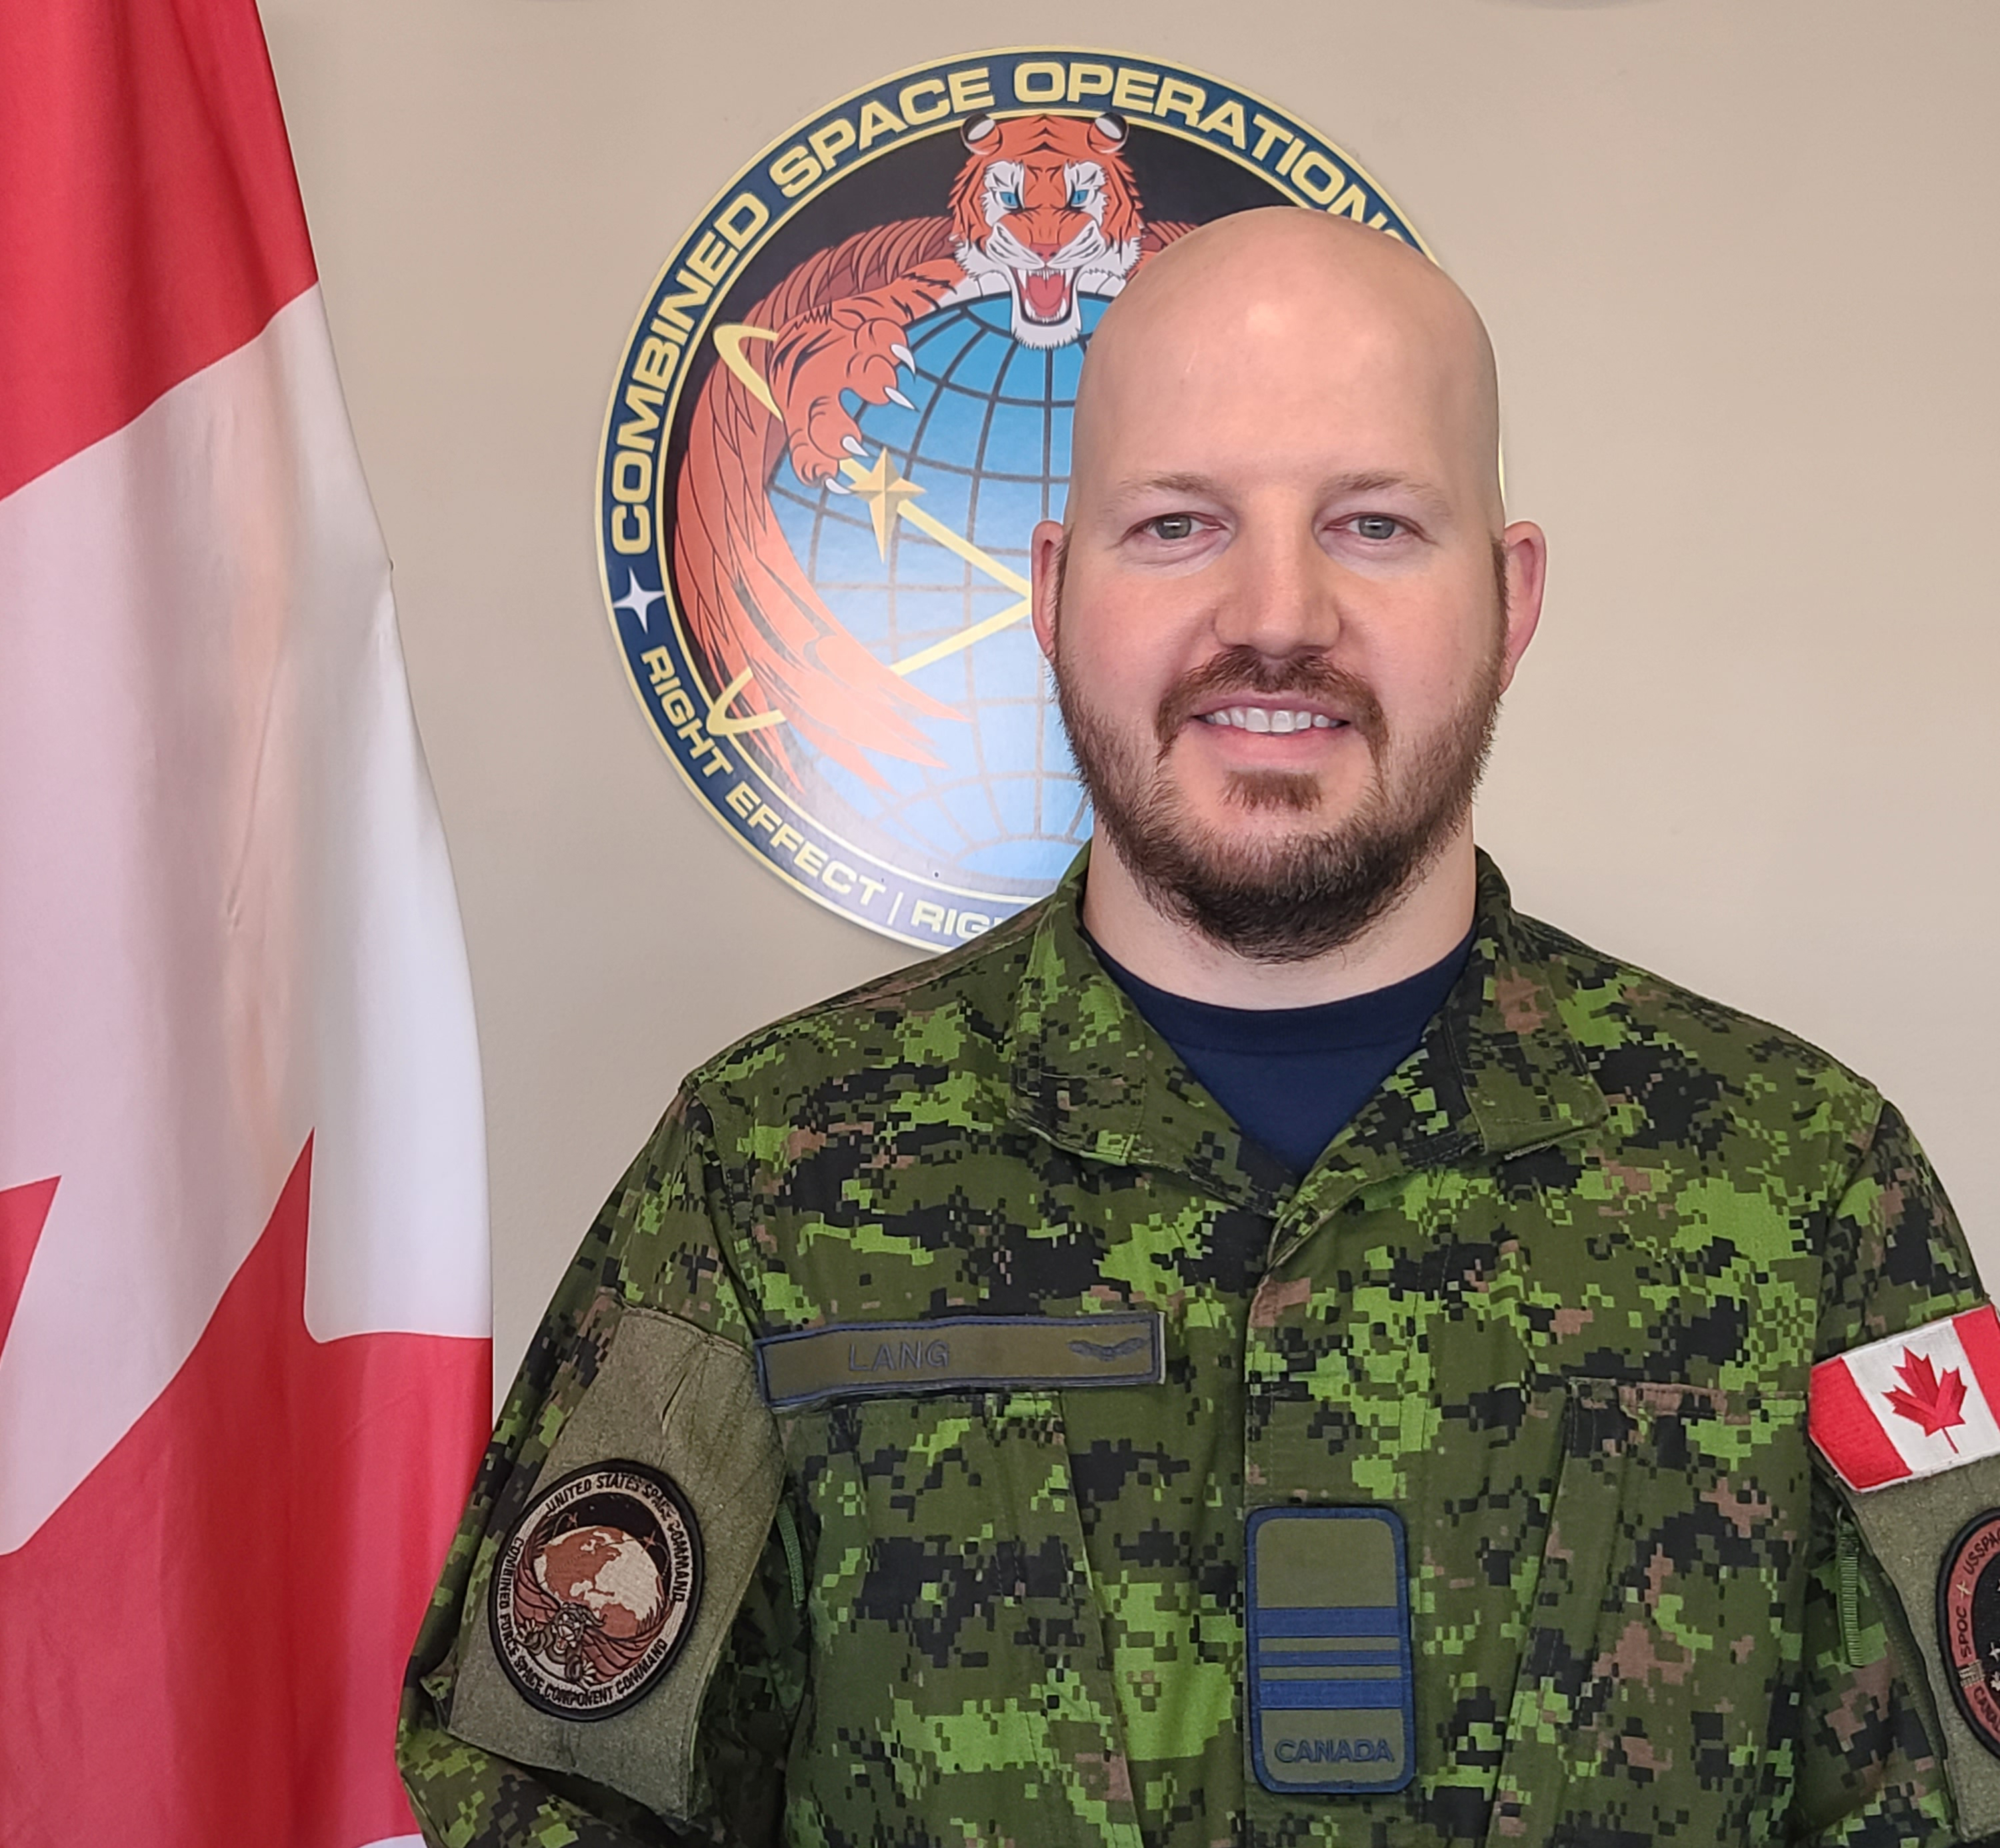 A man wearing a military camouflage uniform stands in front of a Canadian flag and military crests.